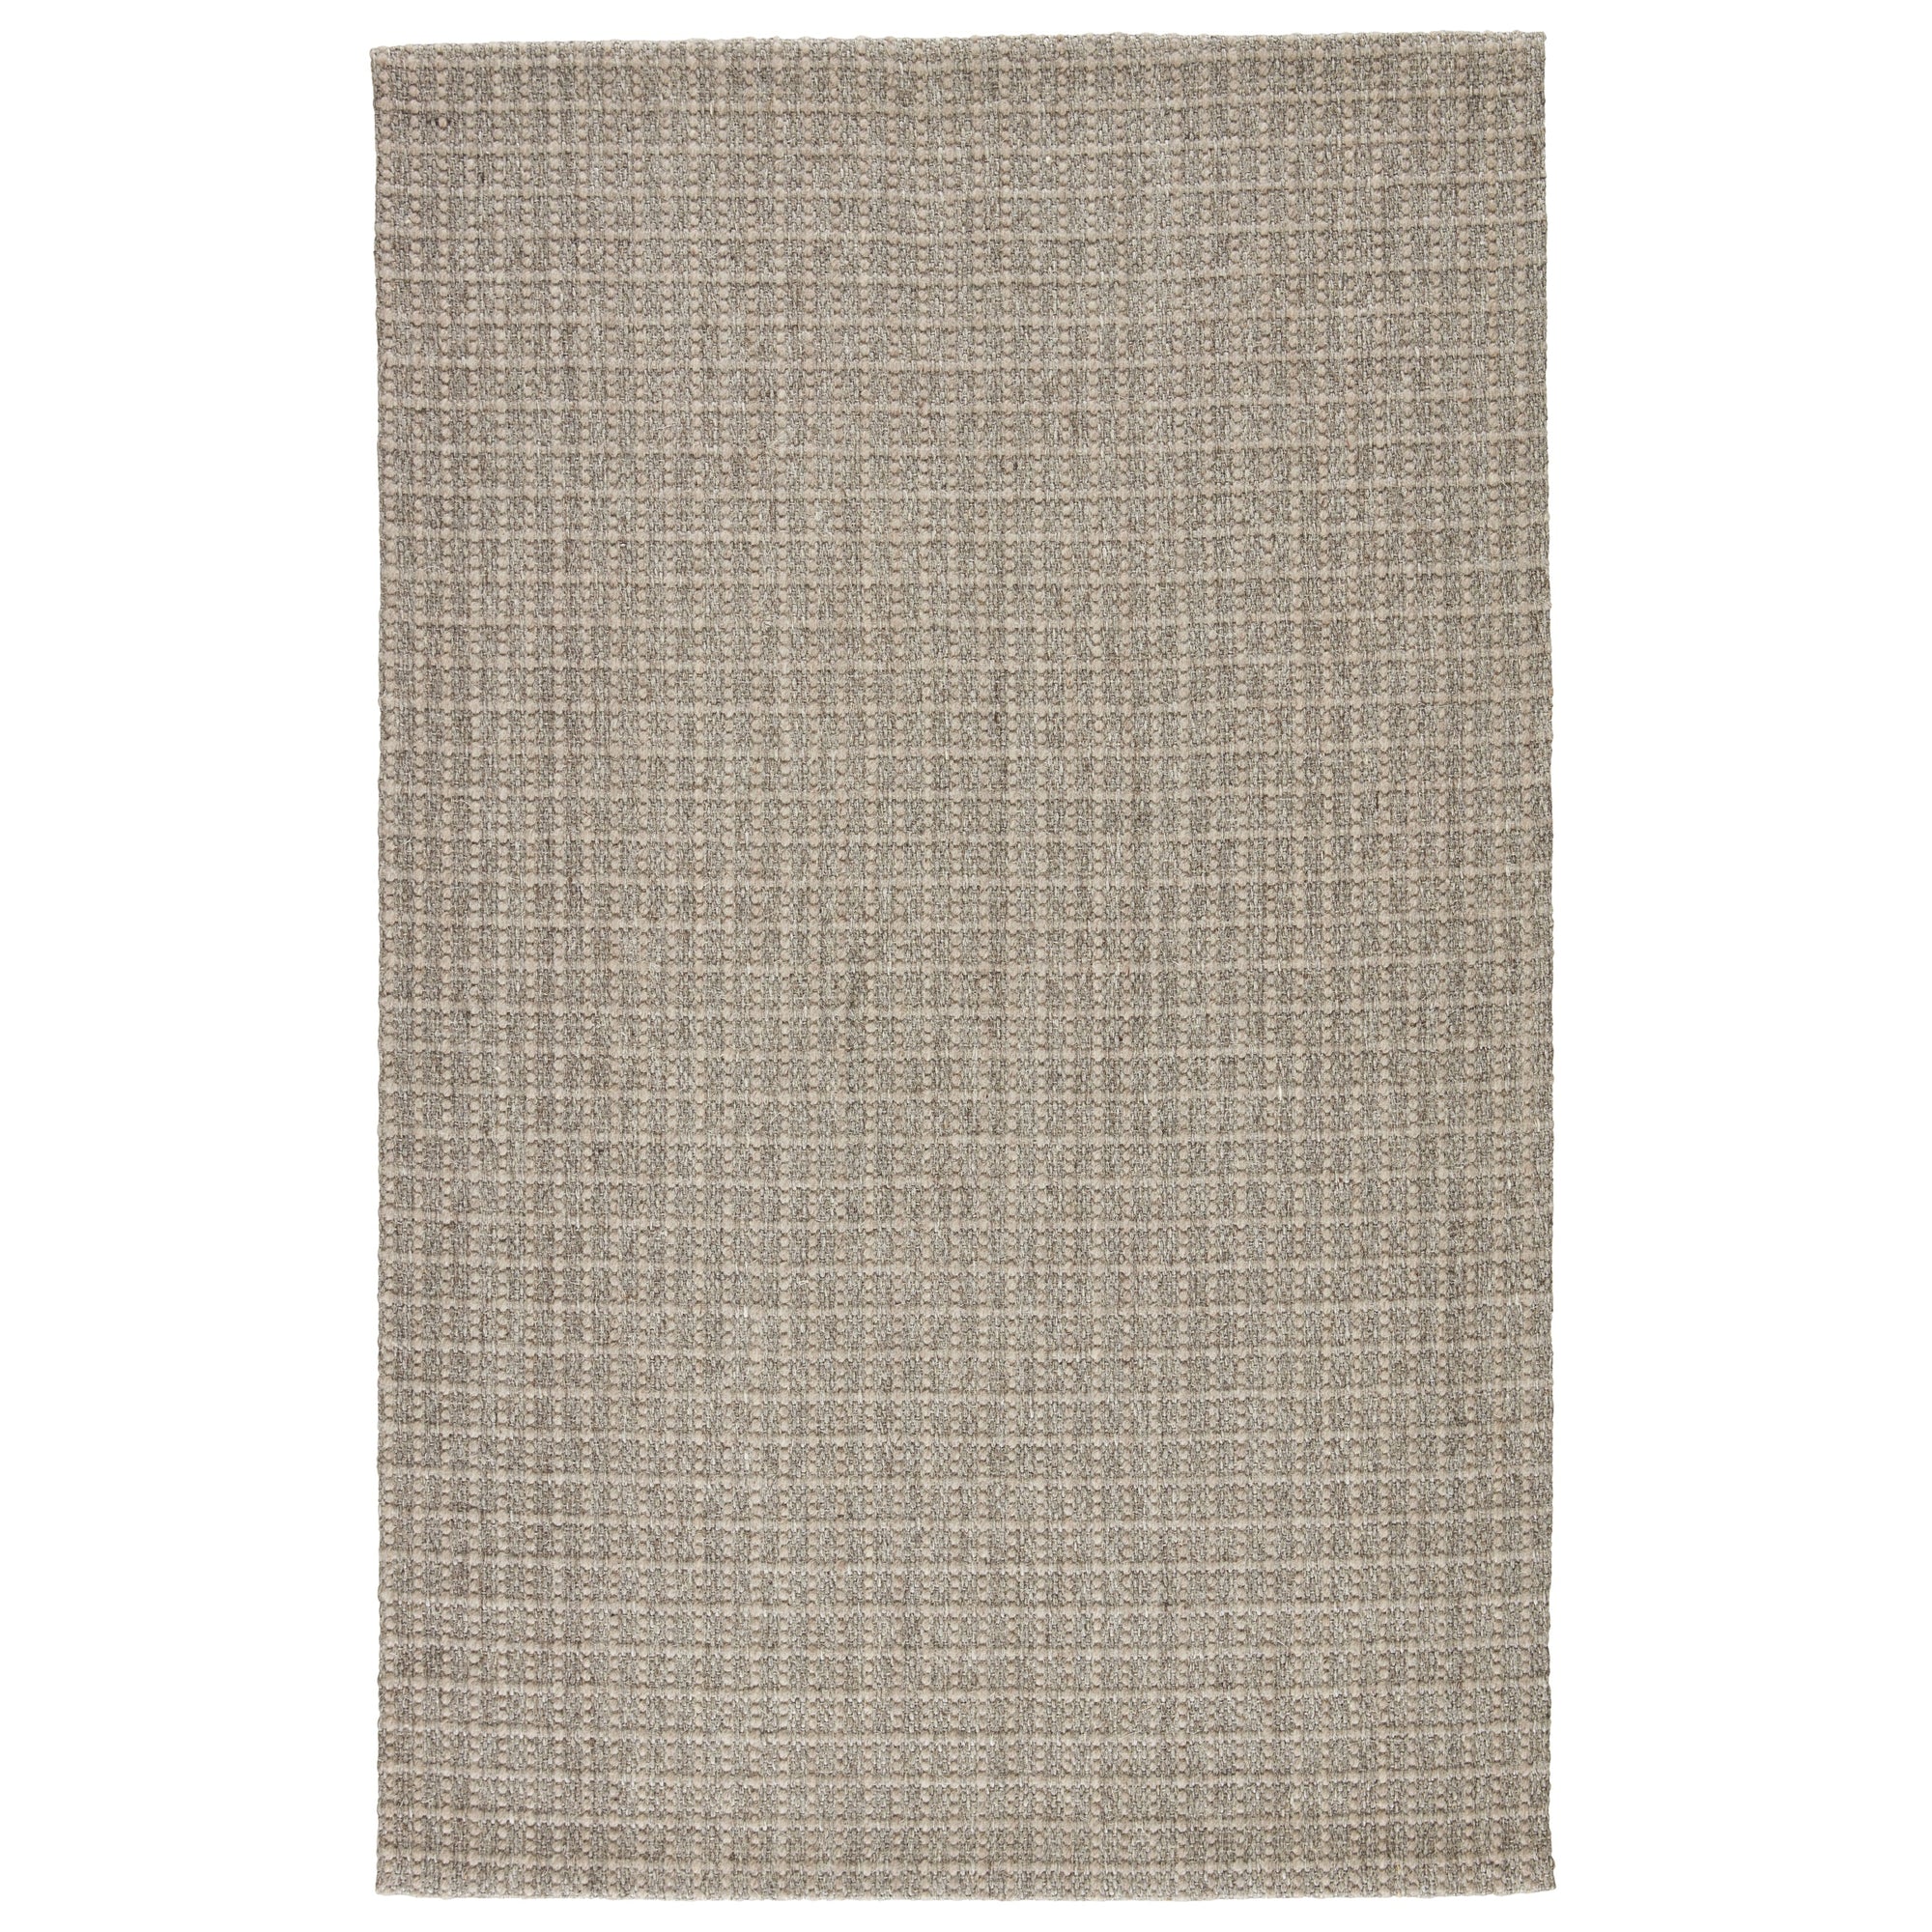 Rugs by Roo | Jaipur Living Tane Natural Solid Gray Area Rug-RUG145961